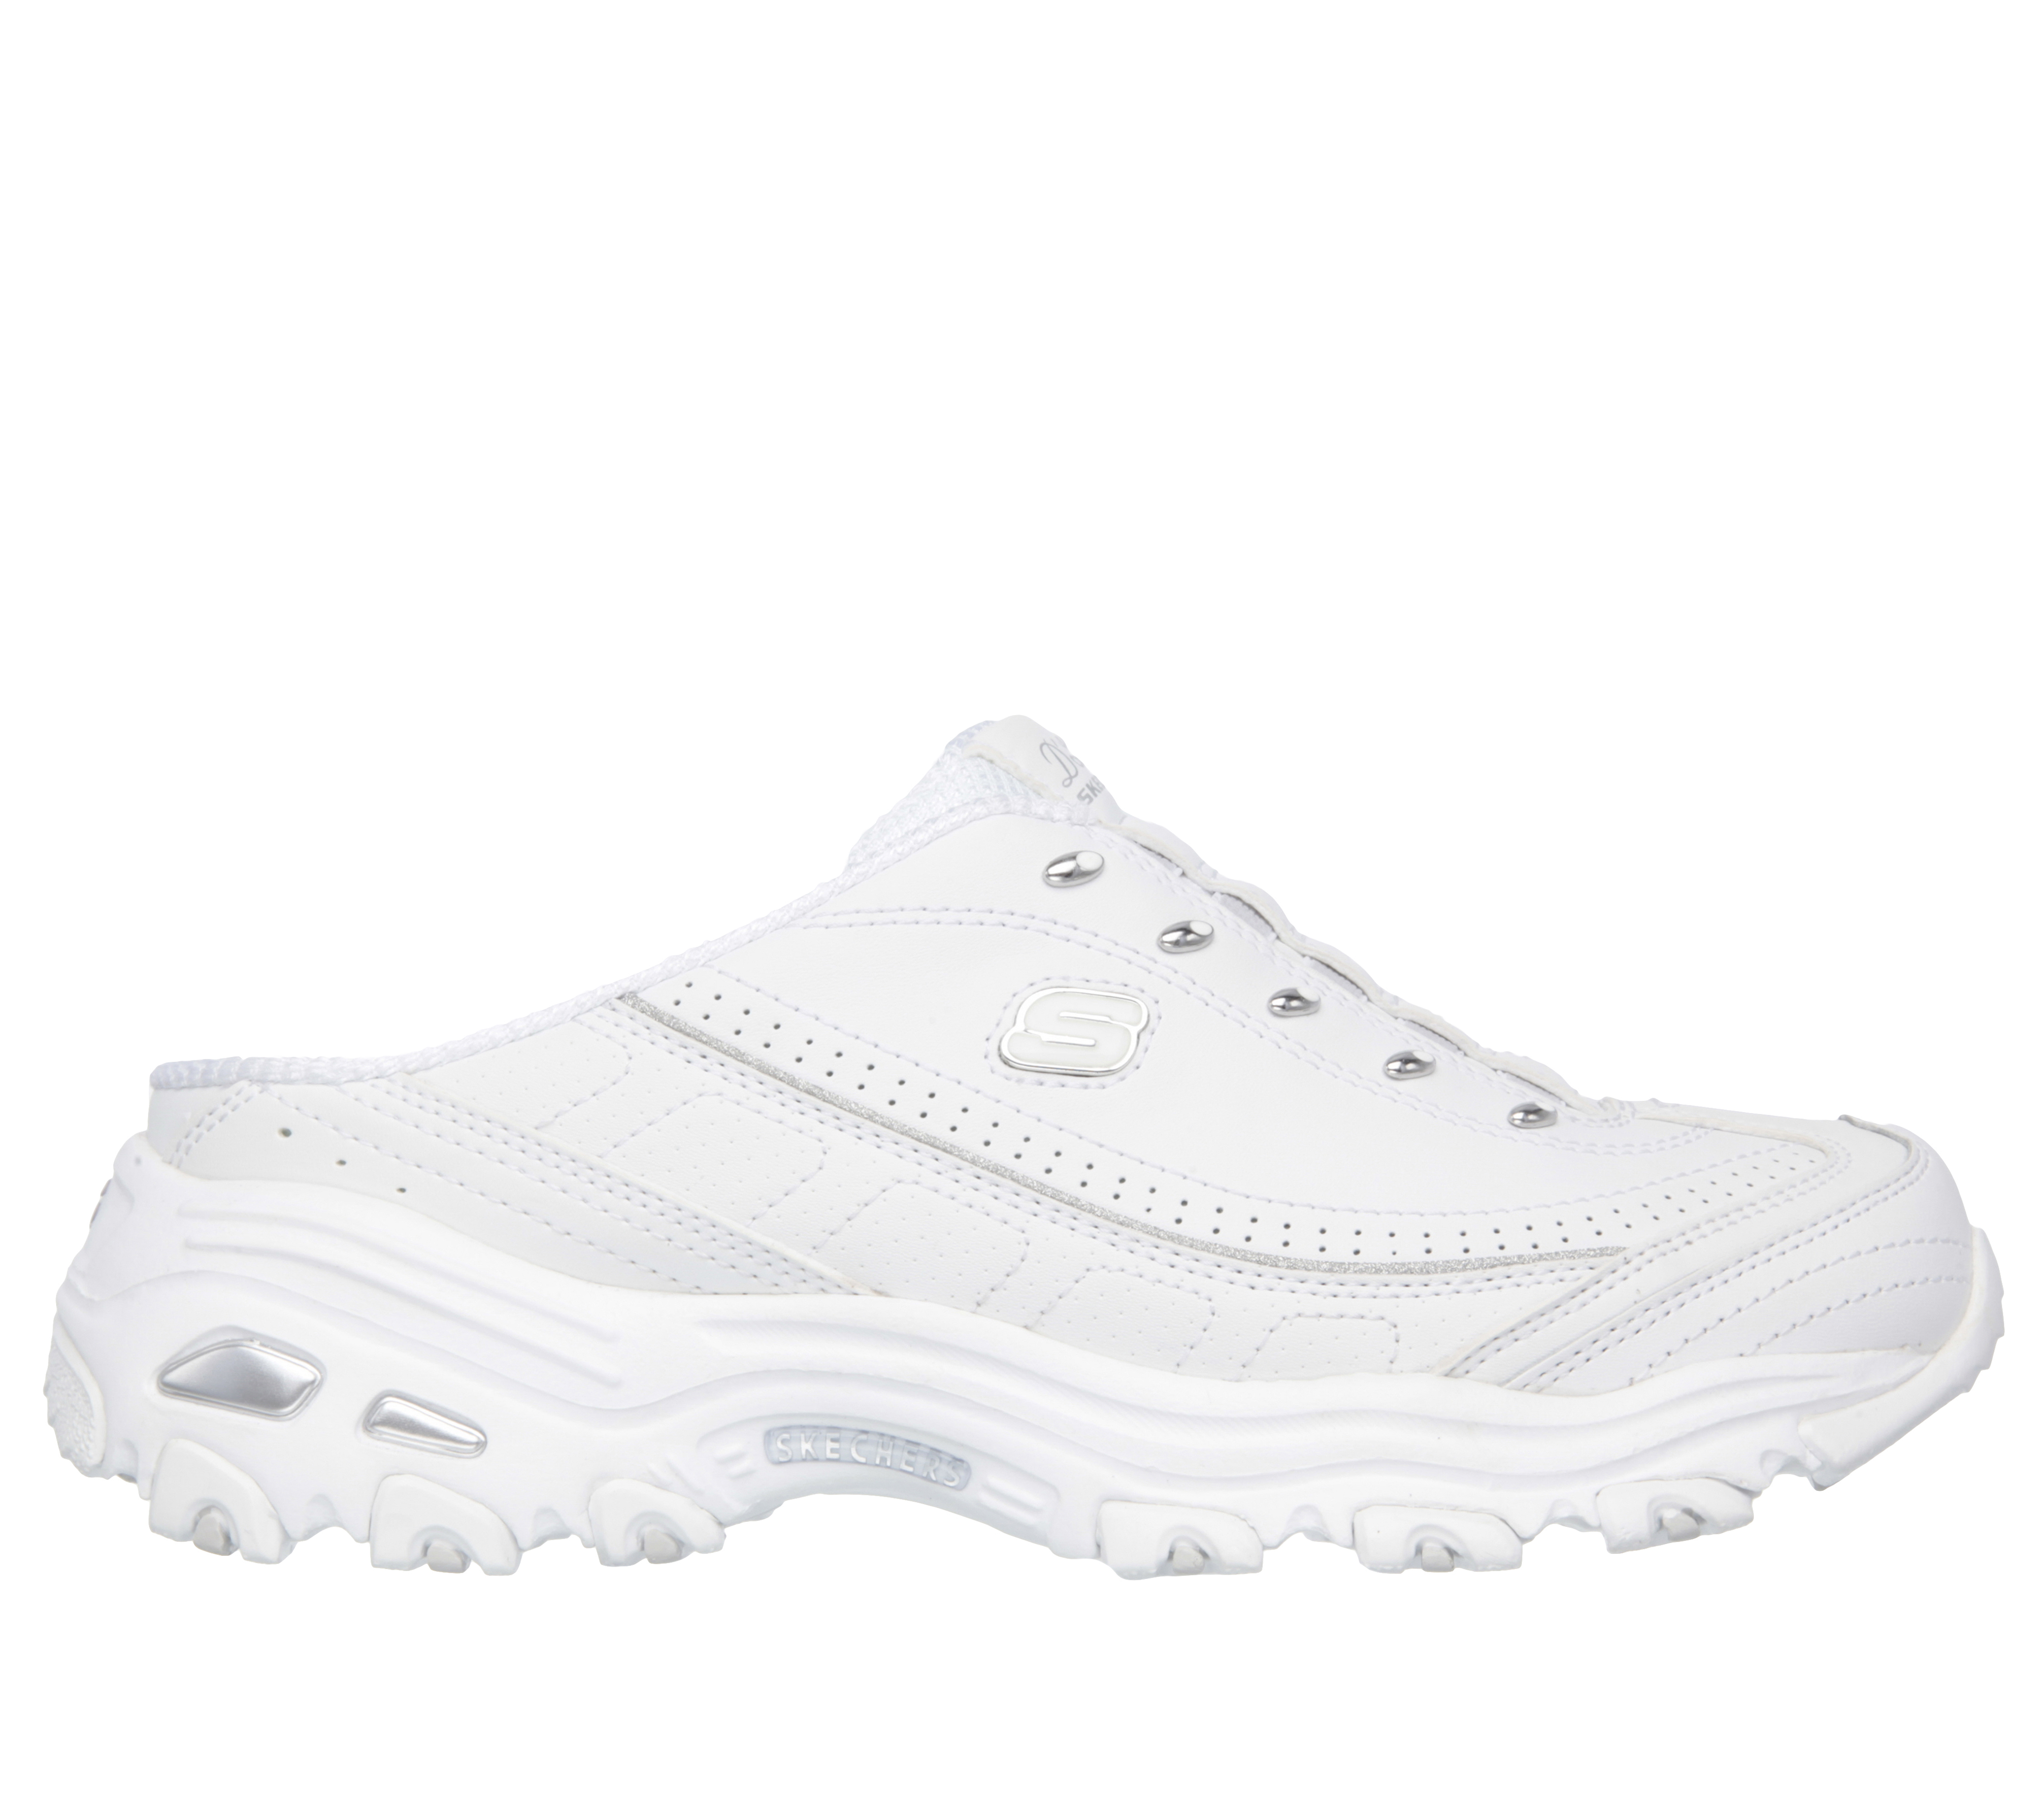 Skechers D Lites Fashion Sneakers Womens Size 9.5 Wide Shoes White Silver  Grey